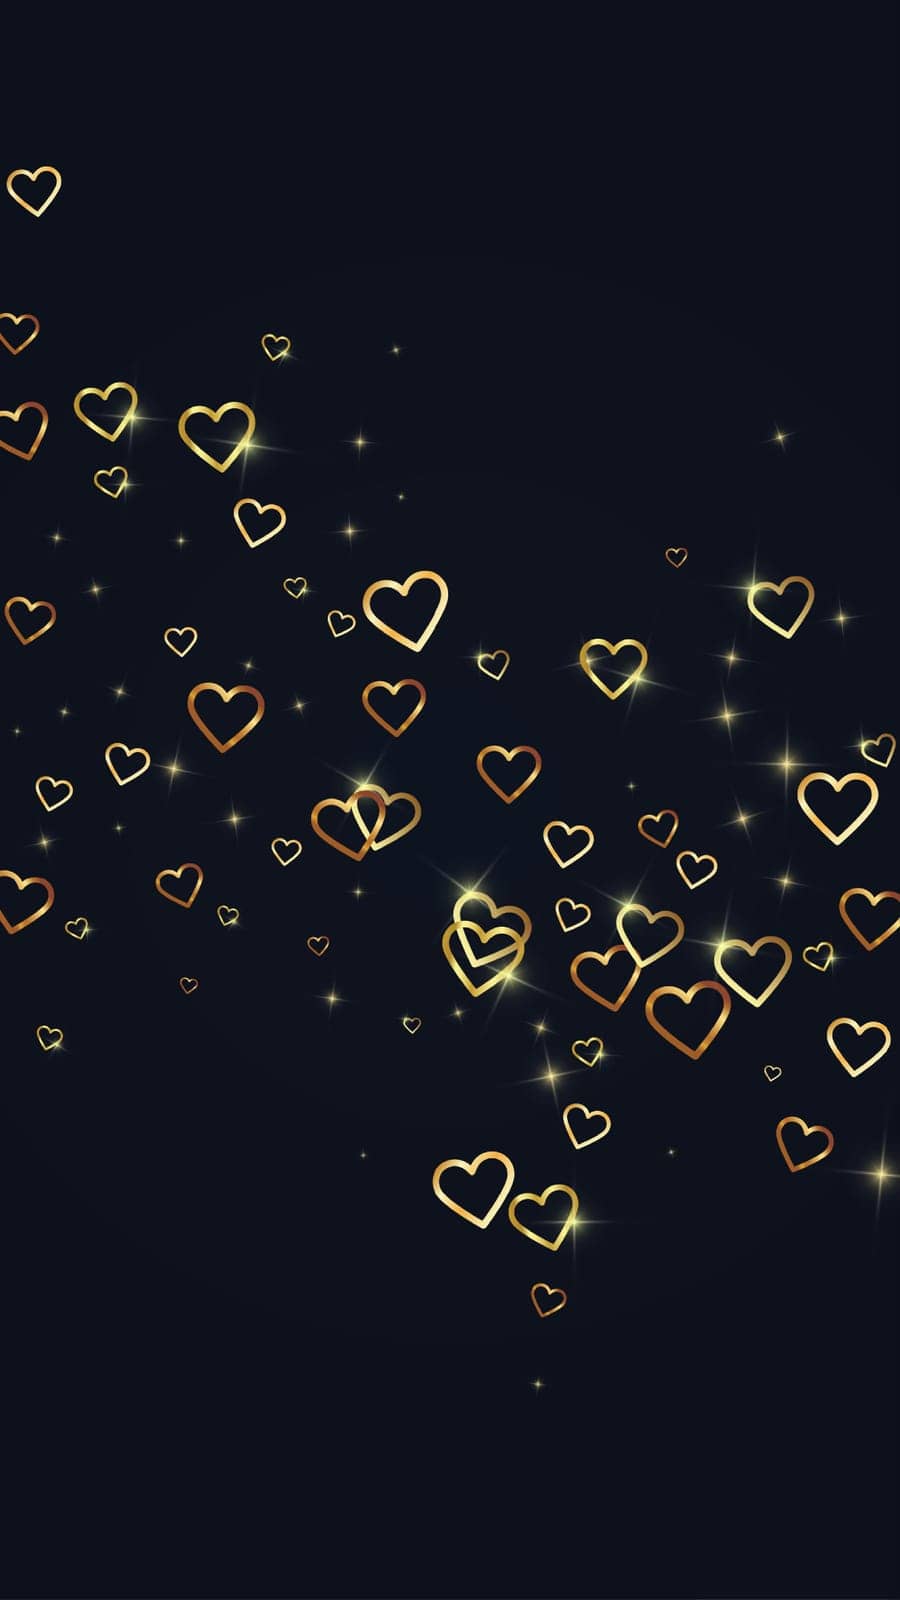 Flying hearts for valentine's day. Gold hearts scattered on black background. Beautiful flying hearts vector illustration.